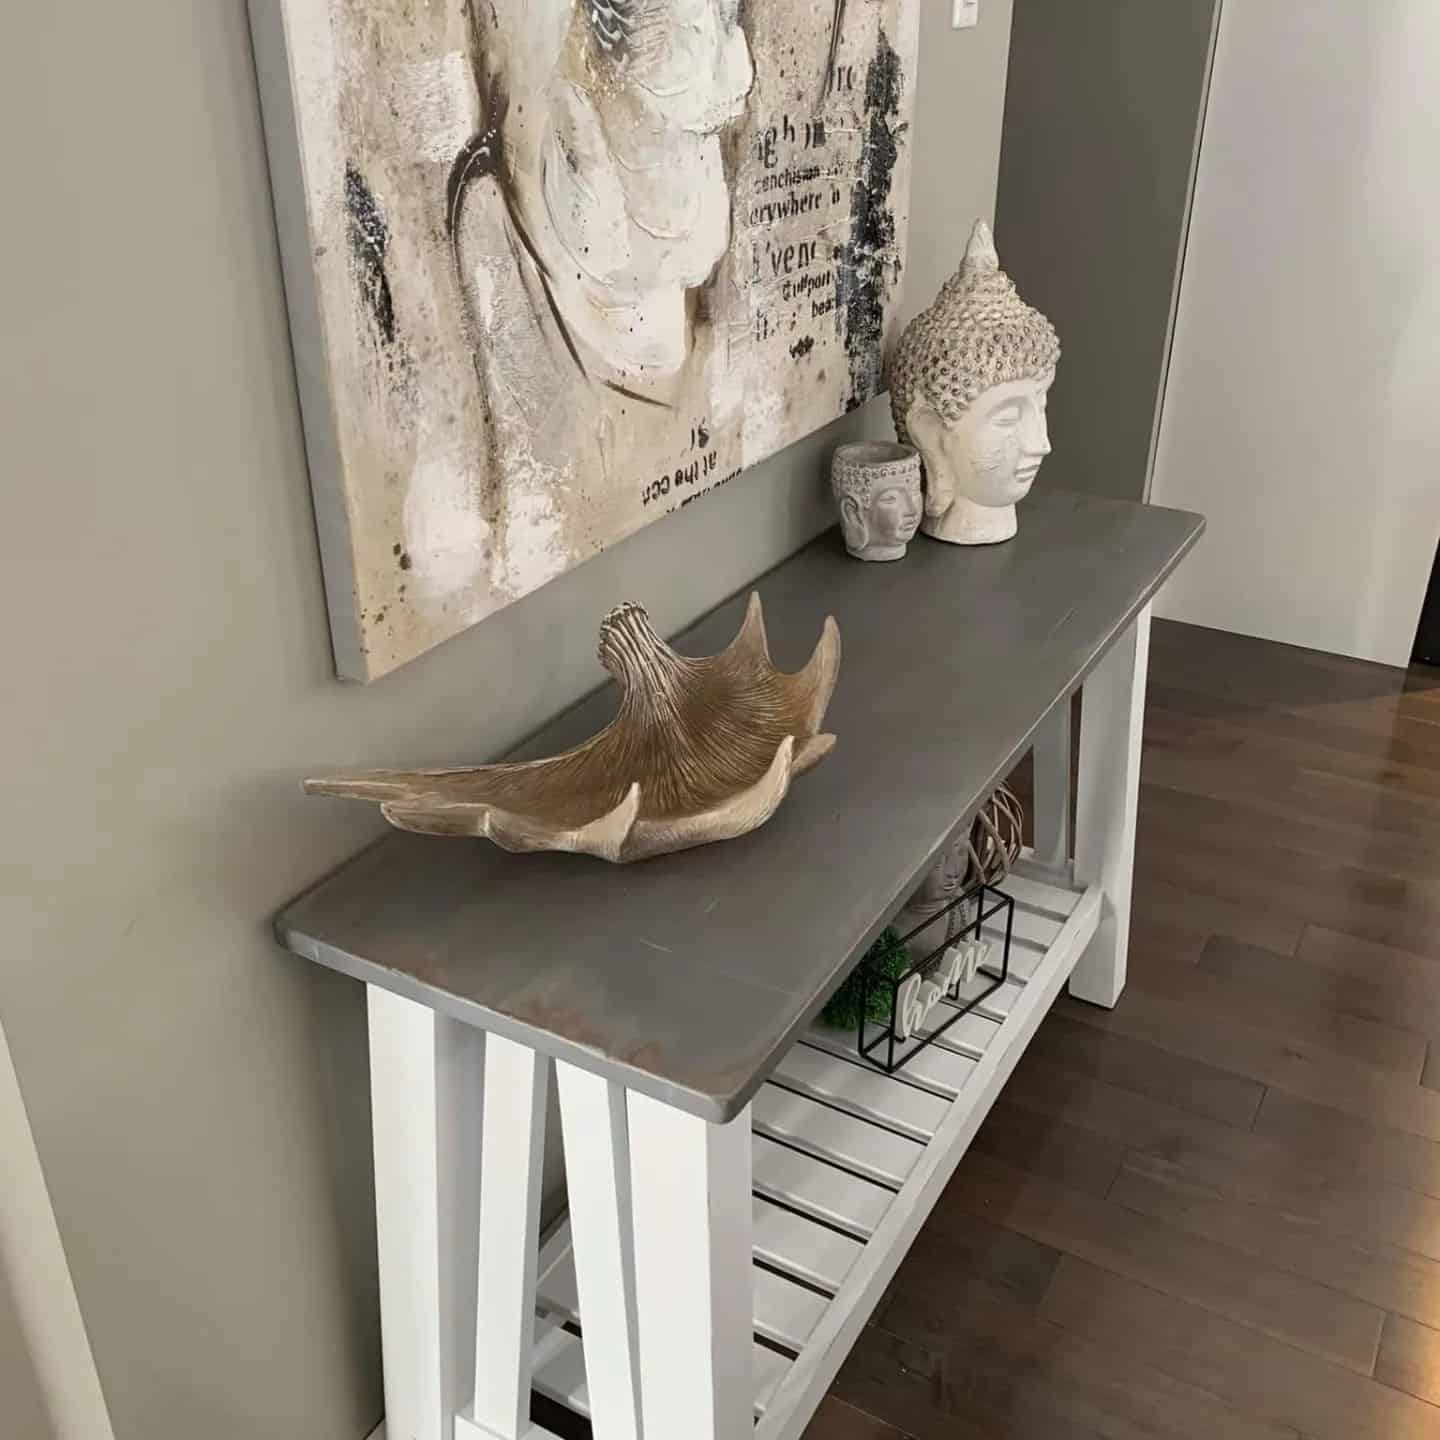 Grey and White Glaze Stain Colorantic Chalk Based Paint on Wood Entrance Table